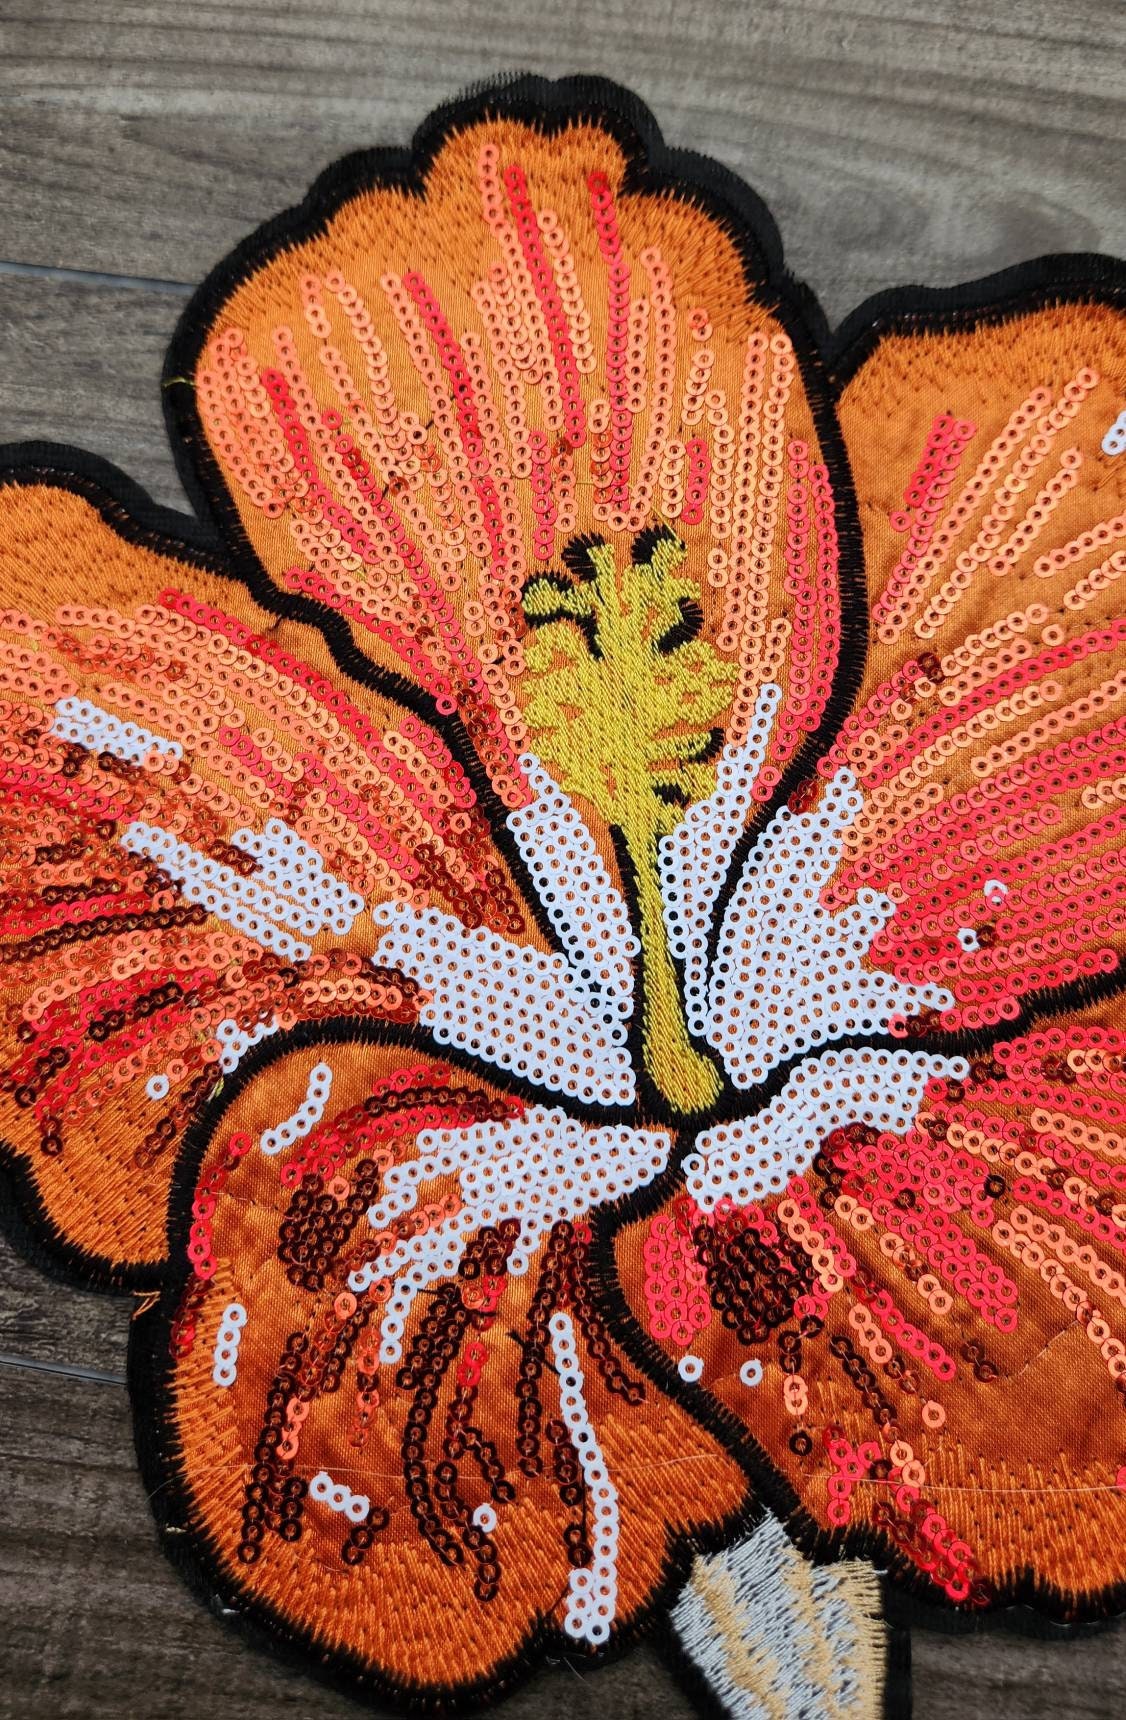 NEW 1-pc, 10" ORANGE Sequins and Embroidered Flower, Vibrant Embroidered Sew-on Floral Patches, Large Patches for Clothing